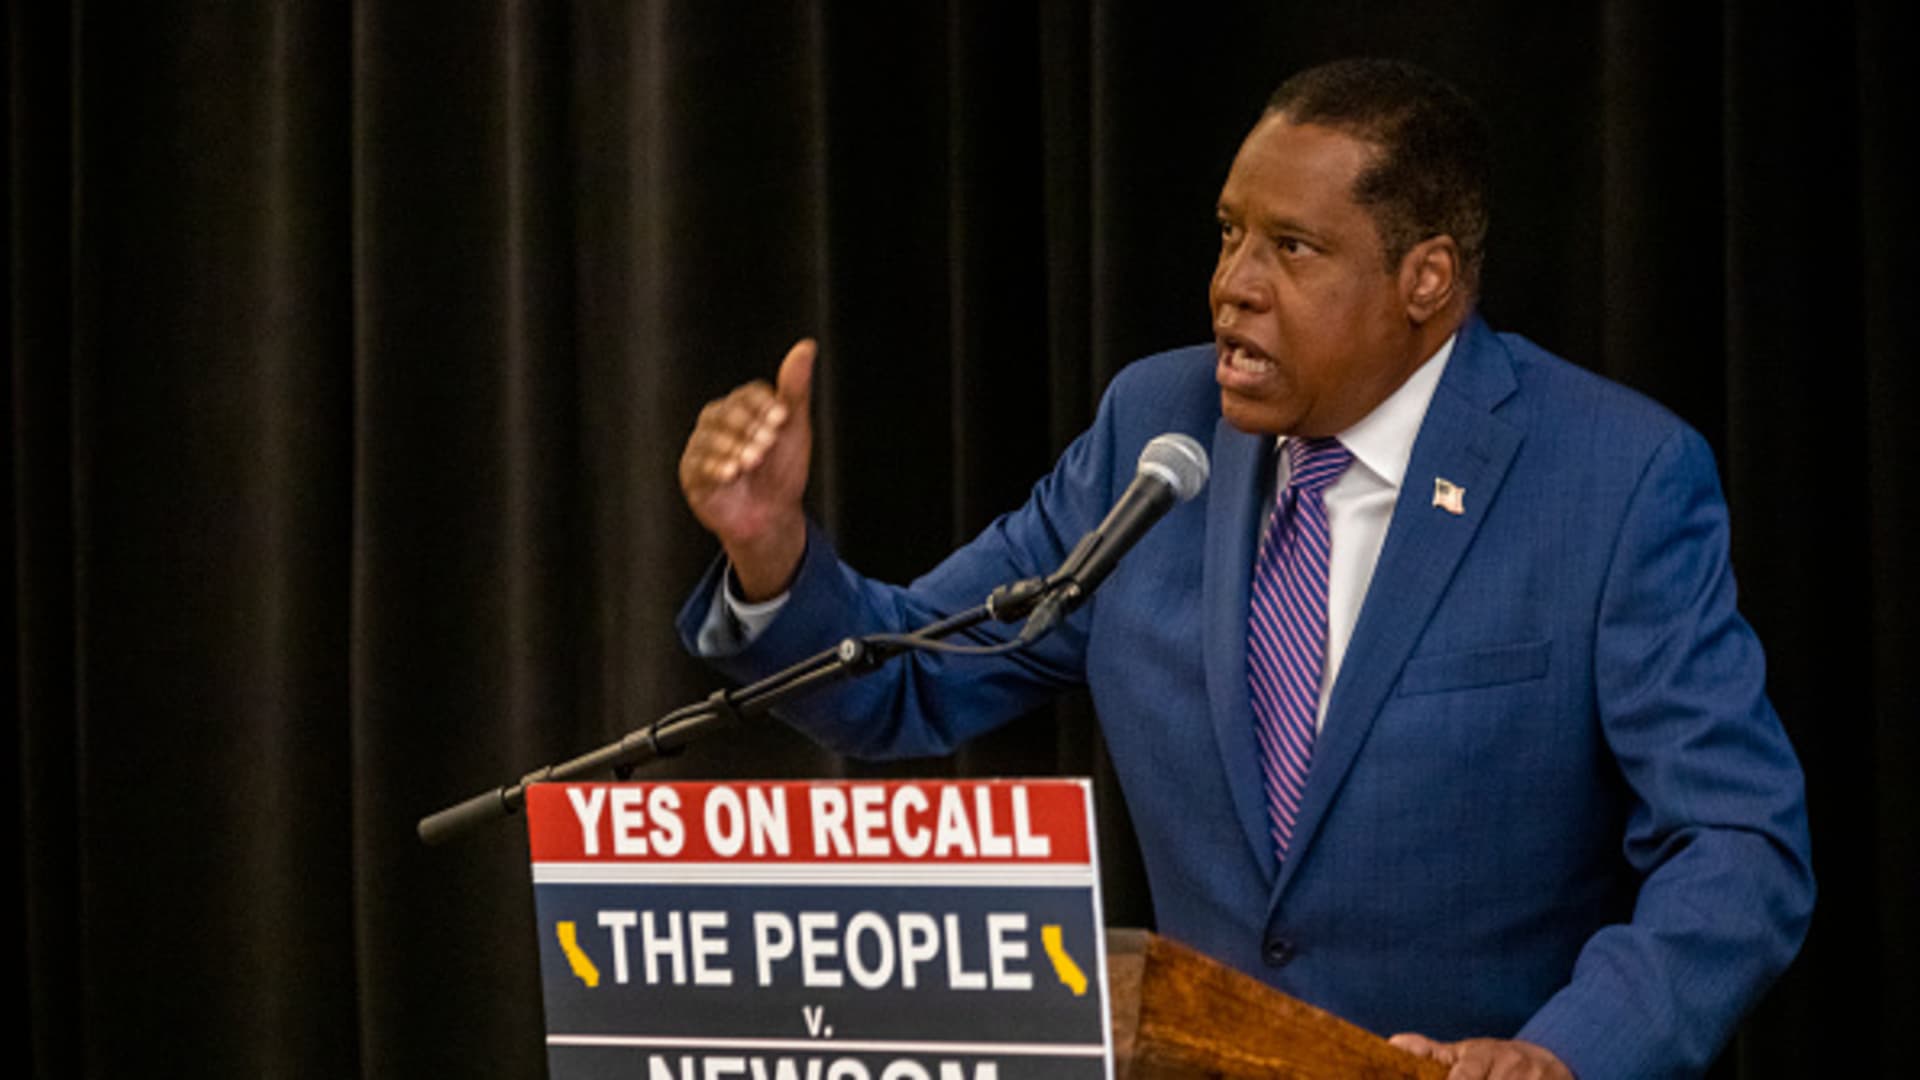 Candidate for governor Larry Elder speaks during a press conference at the Luxe Hotel Sunset Boulevard on Sunday, Sept. 12, 2021 in Los Angeles, CA.